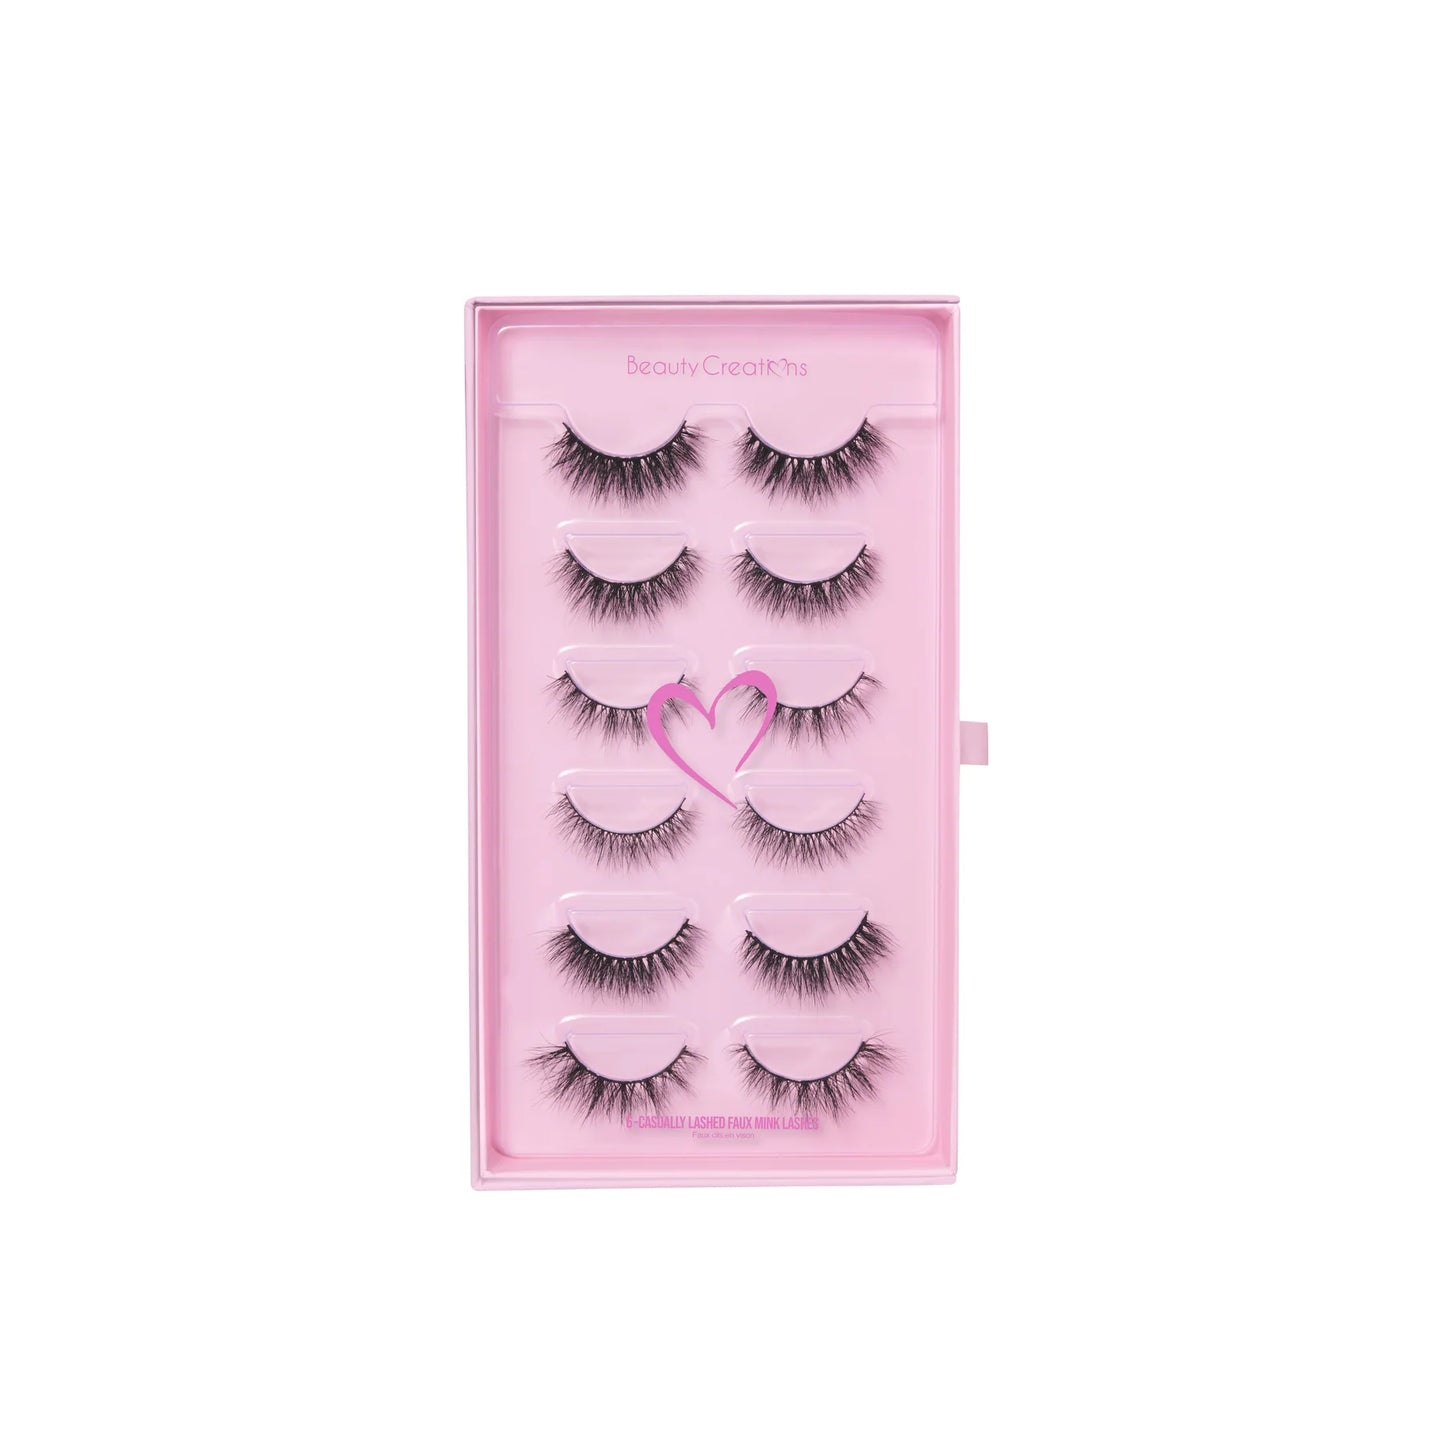 #ELCSET-Casually Beauty Creations 6 Pairs Lash Set